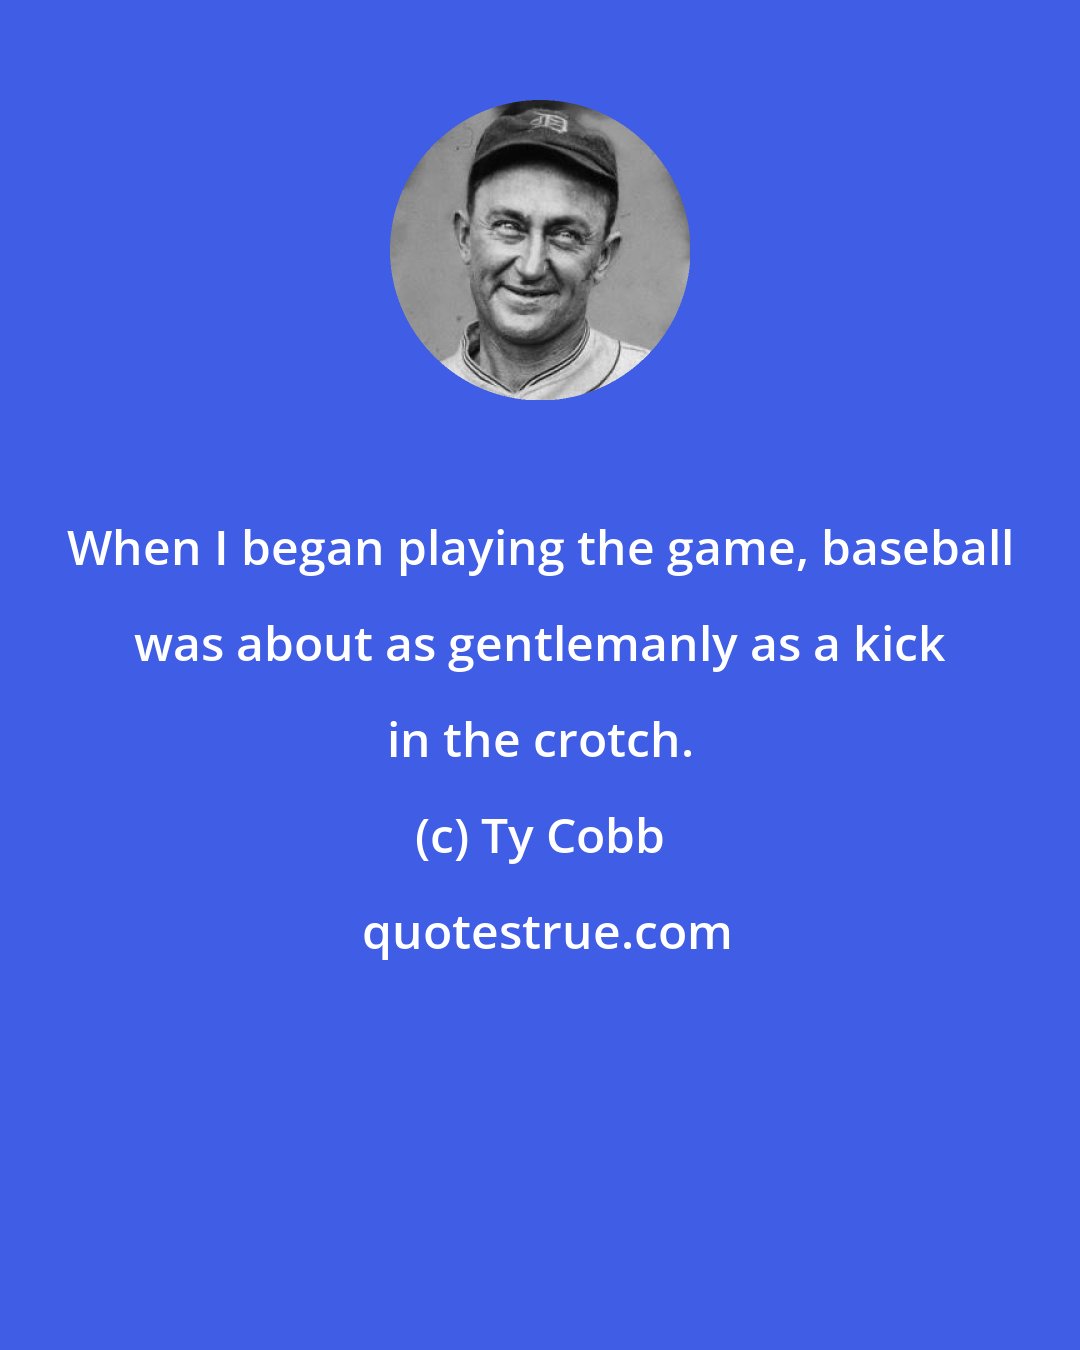 Ty Cobb: When I began playing the game, baseball was about as gentlemanly as a kick in the crotch.